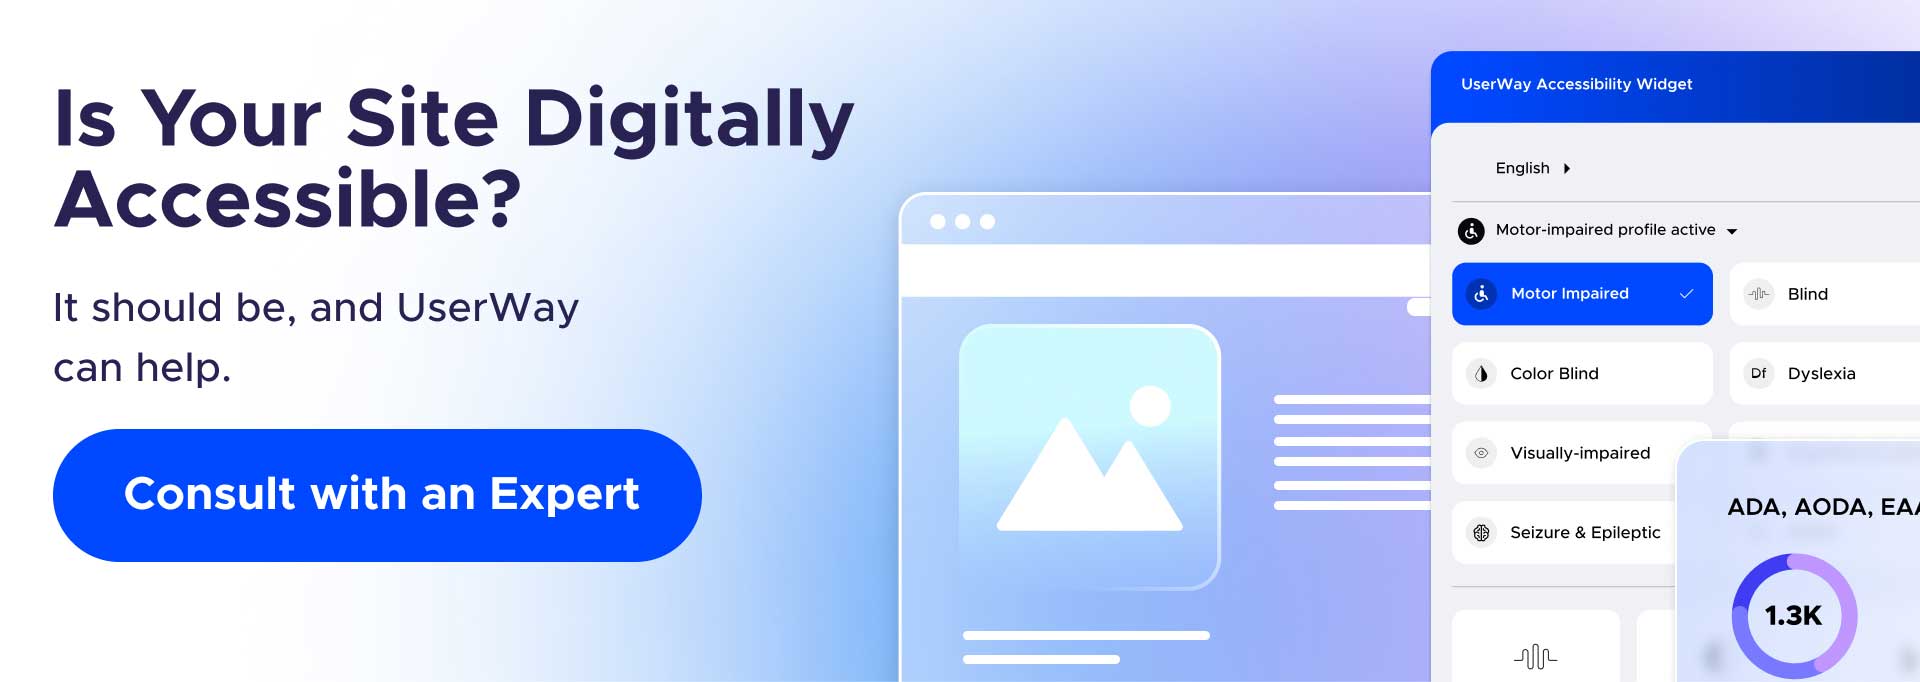 is your site digitally accessible